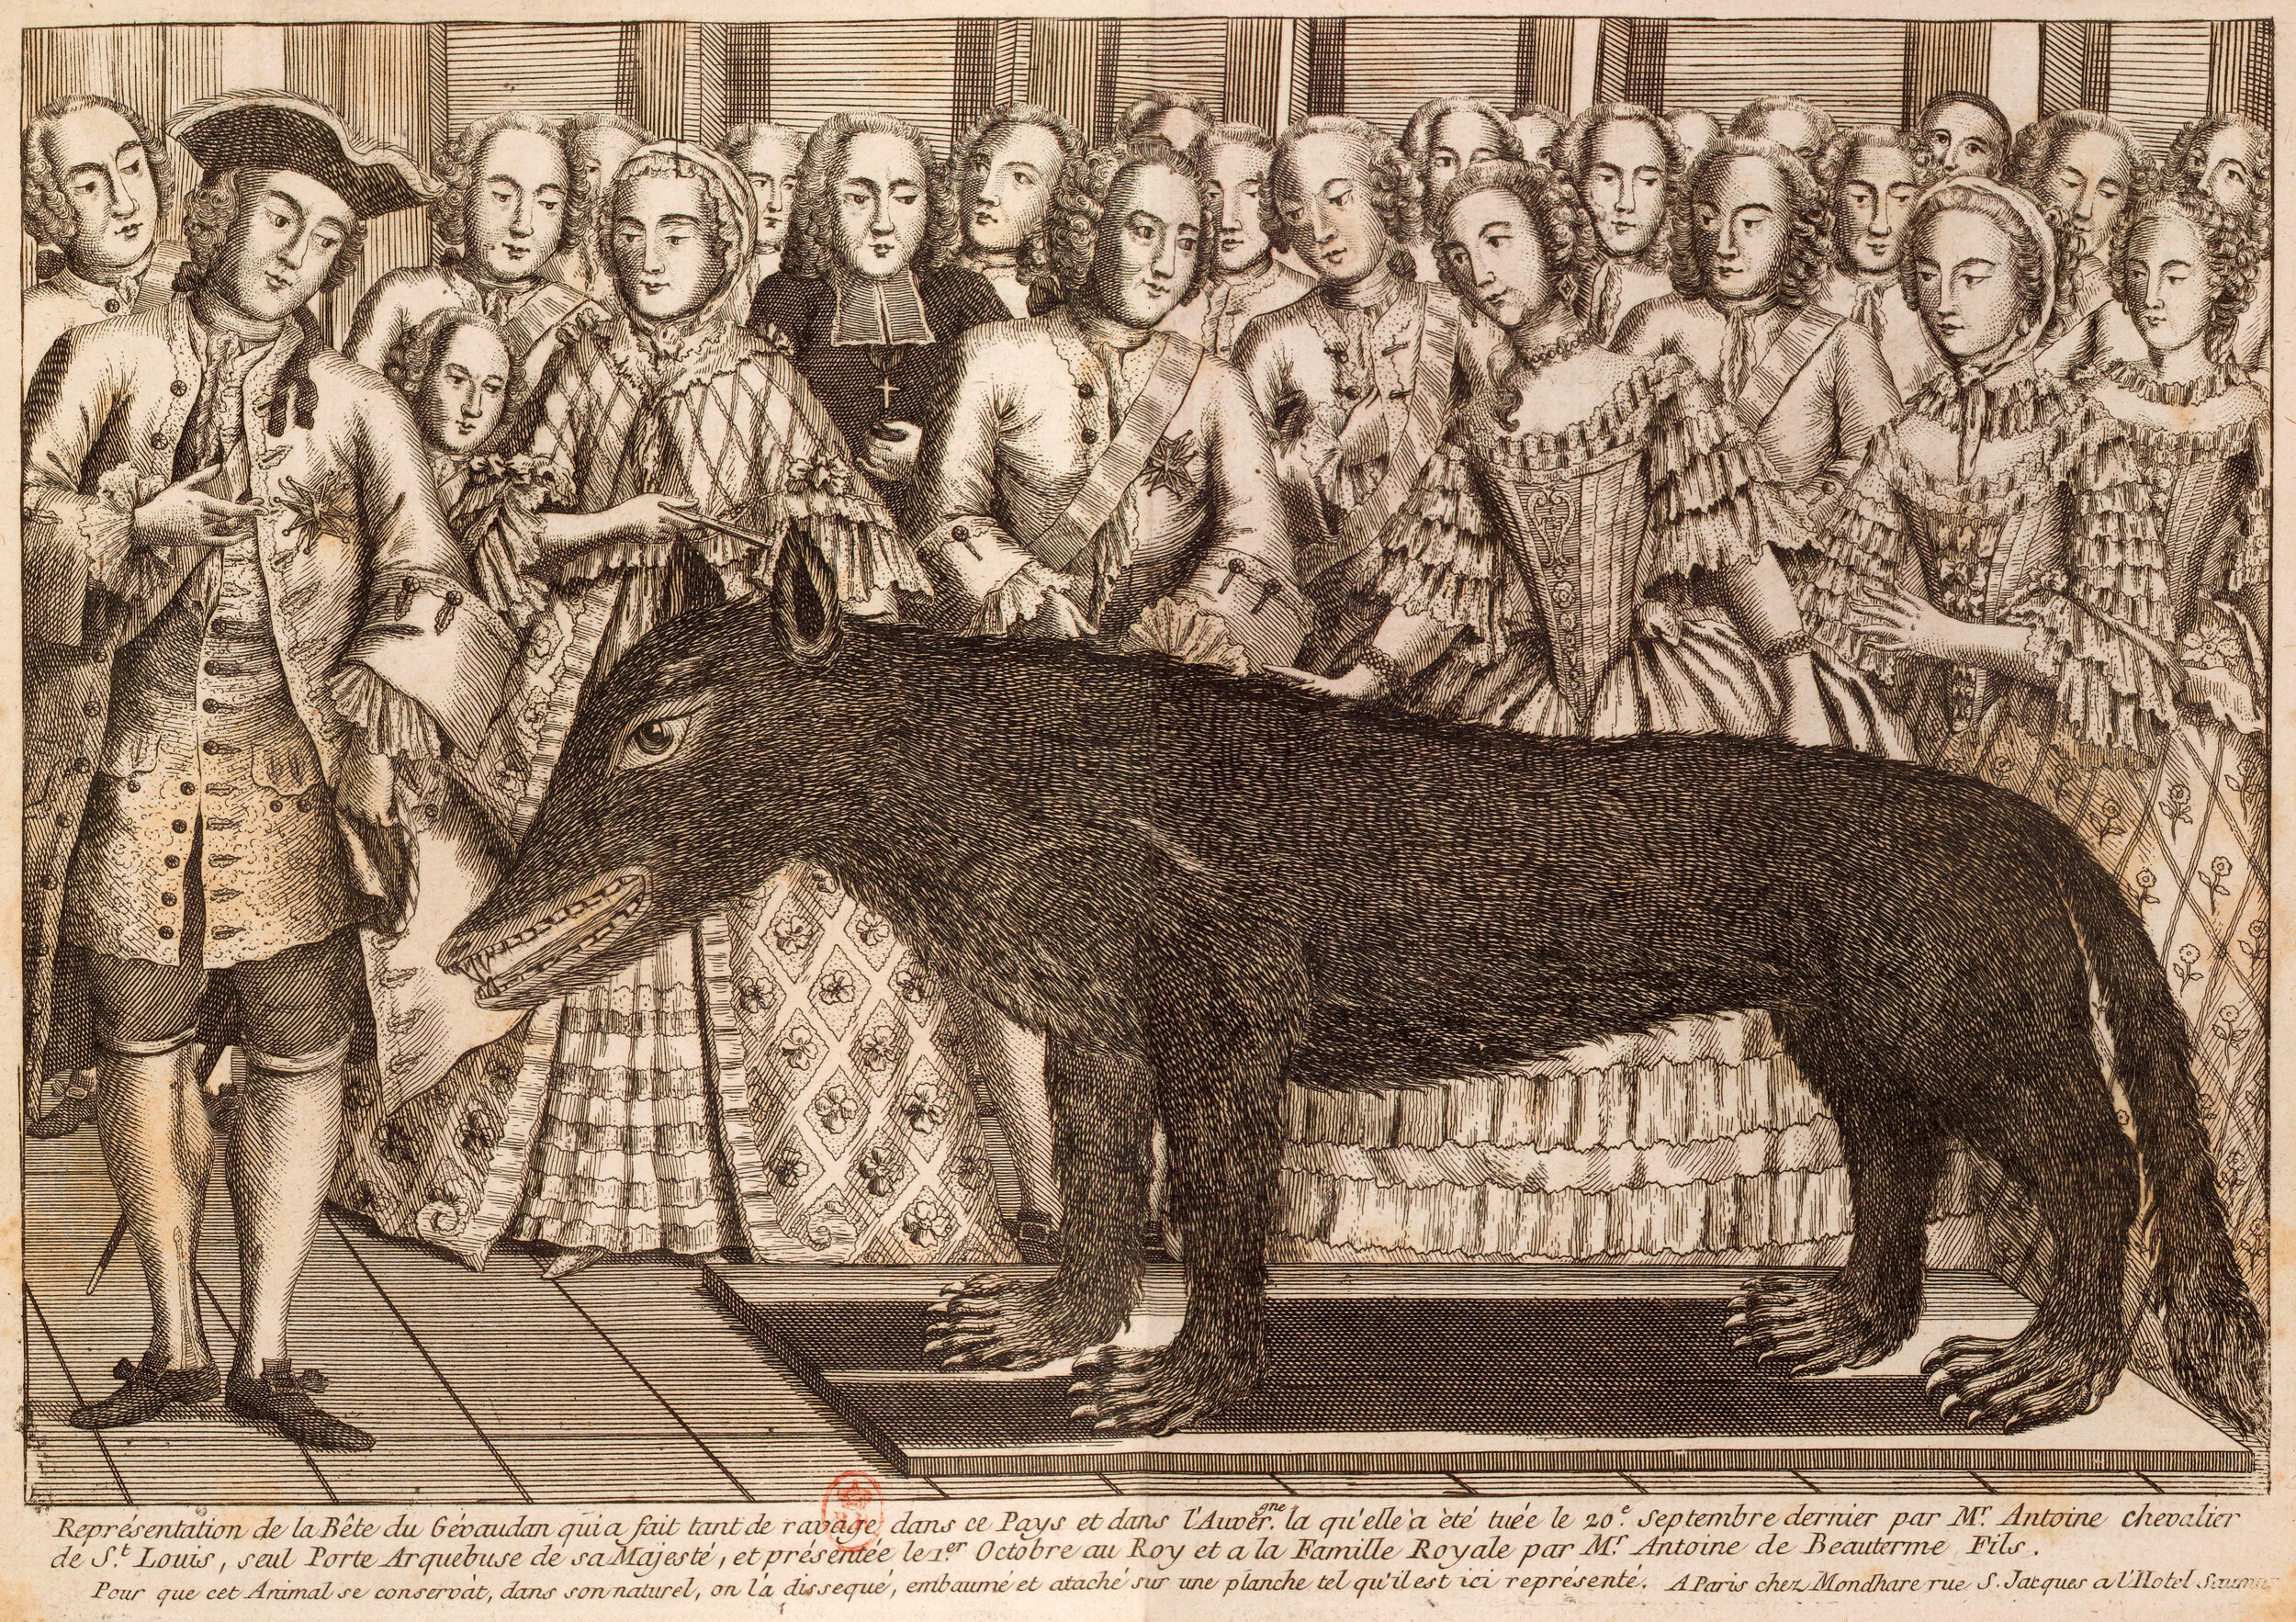  “Presentation of the wolf of Chazes at the  court  of  Versailles . Wearing a  tricorn , Antoine de Beauterne, younger son of  François Antoine , is represented on the left of the engraving. In the center,  Louis XV  feels the  naturalized  beast. Q